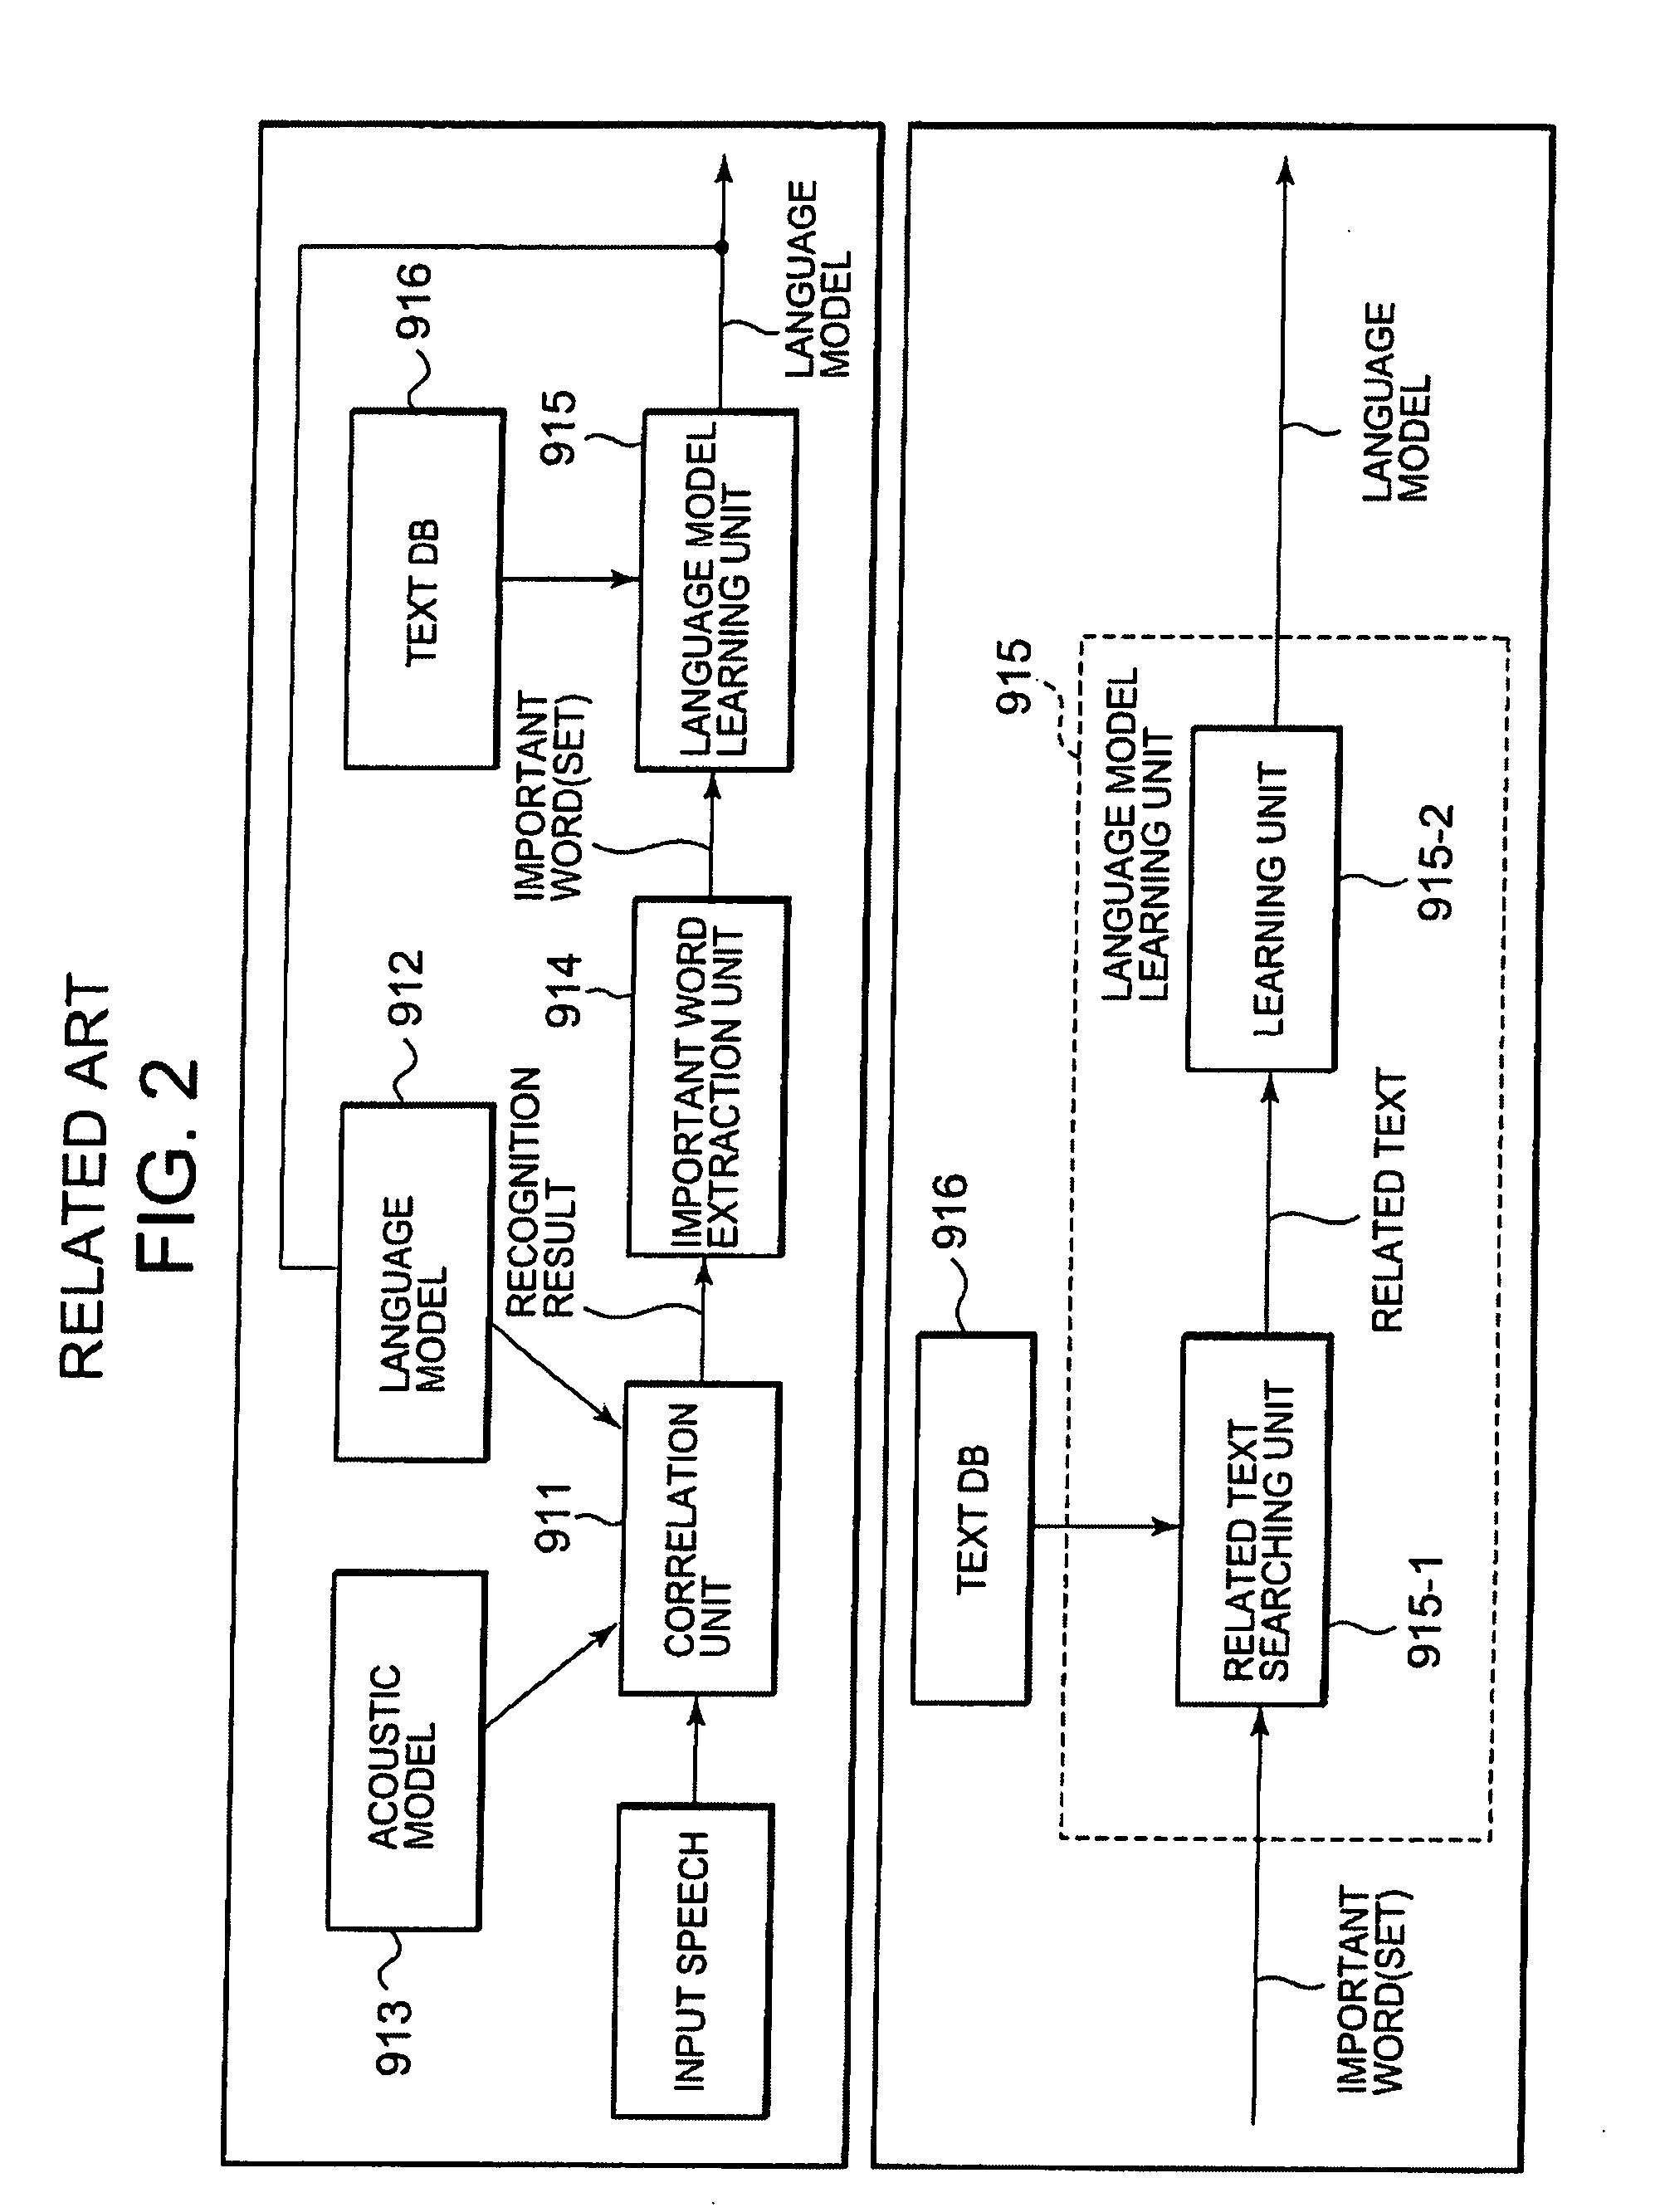 Speech recognition method, speech recognition system, and server thereof